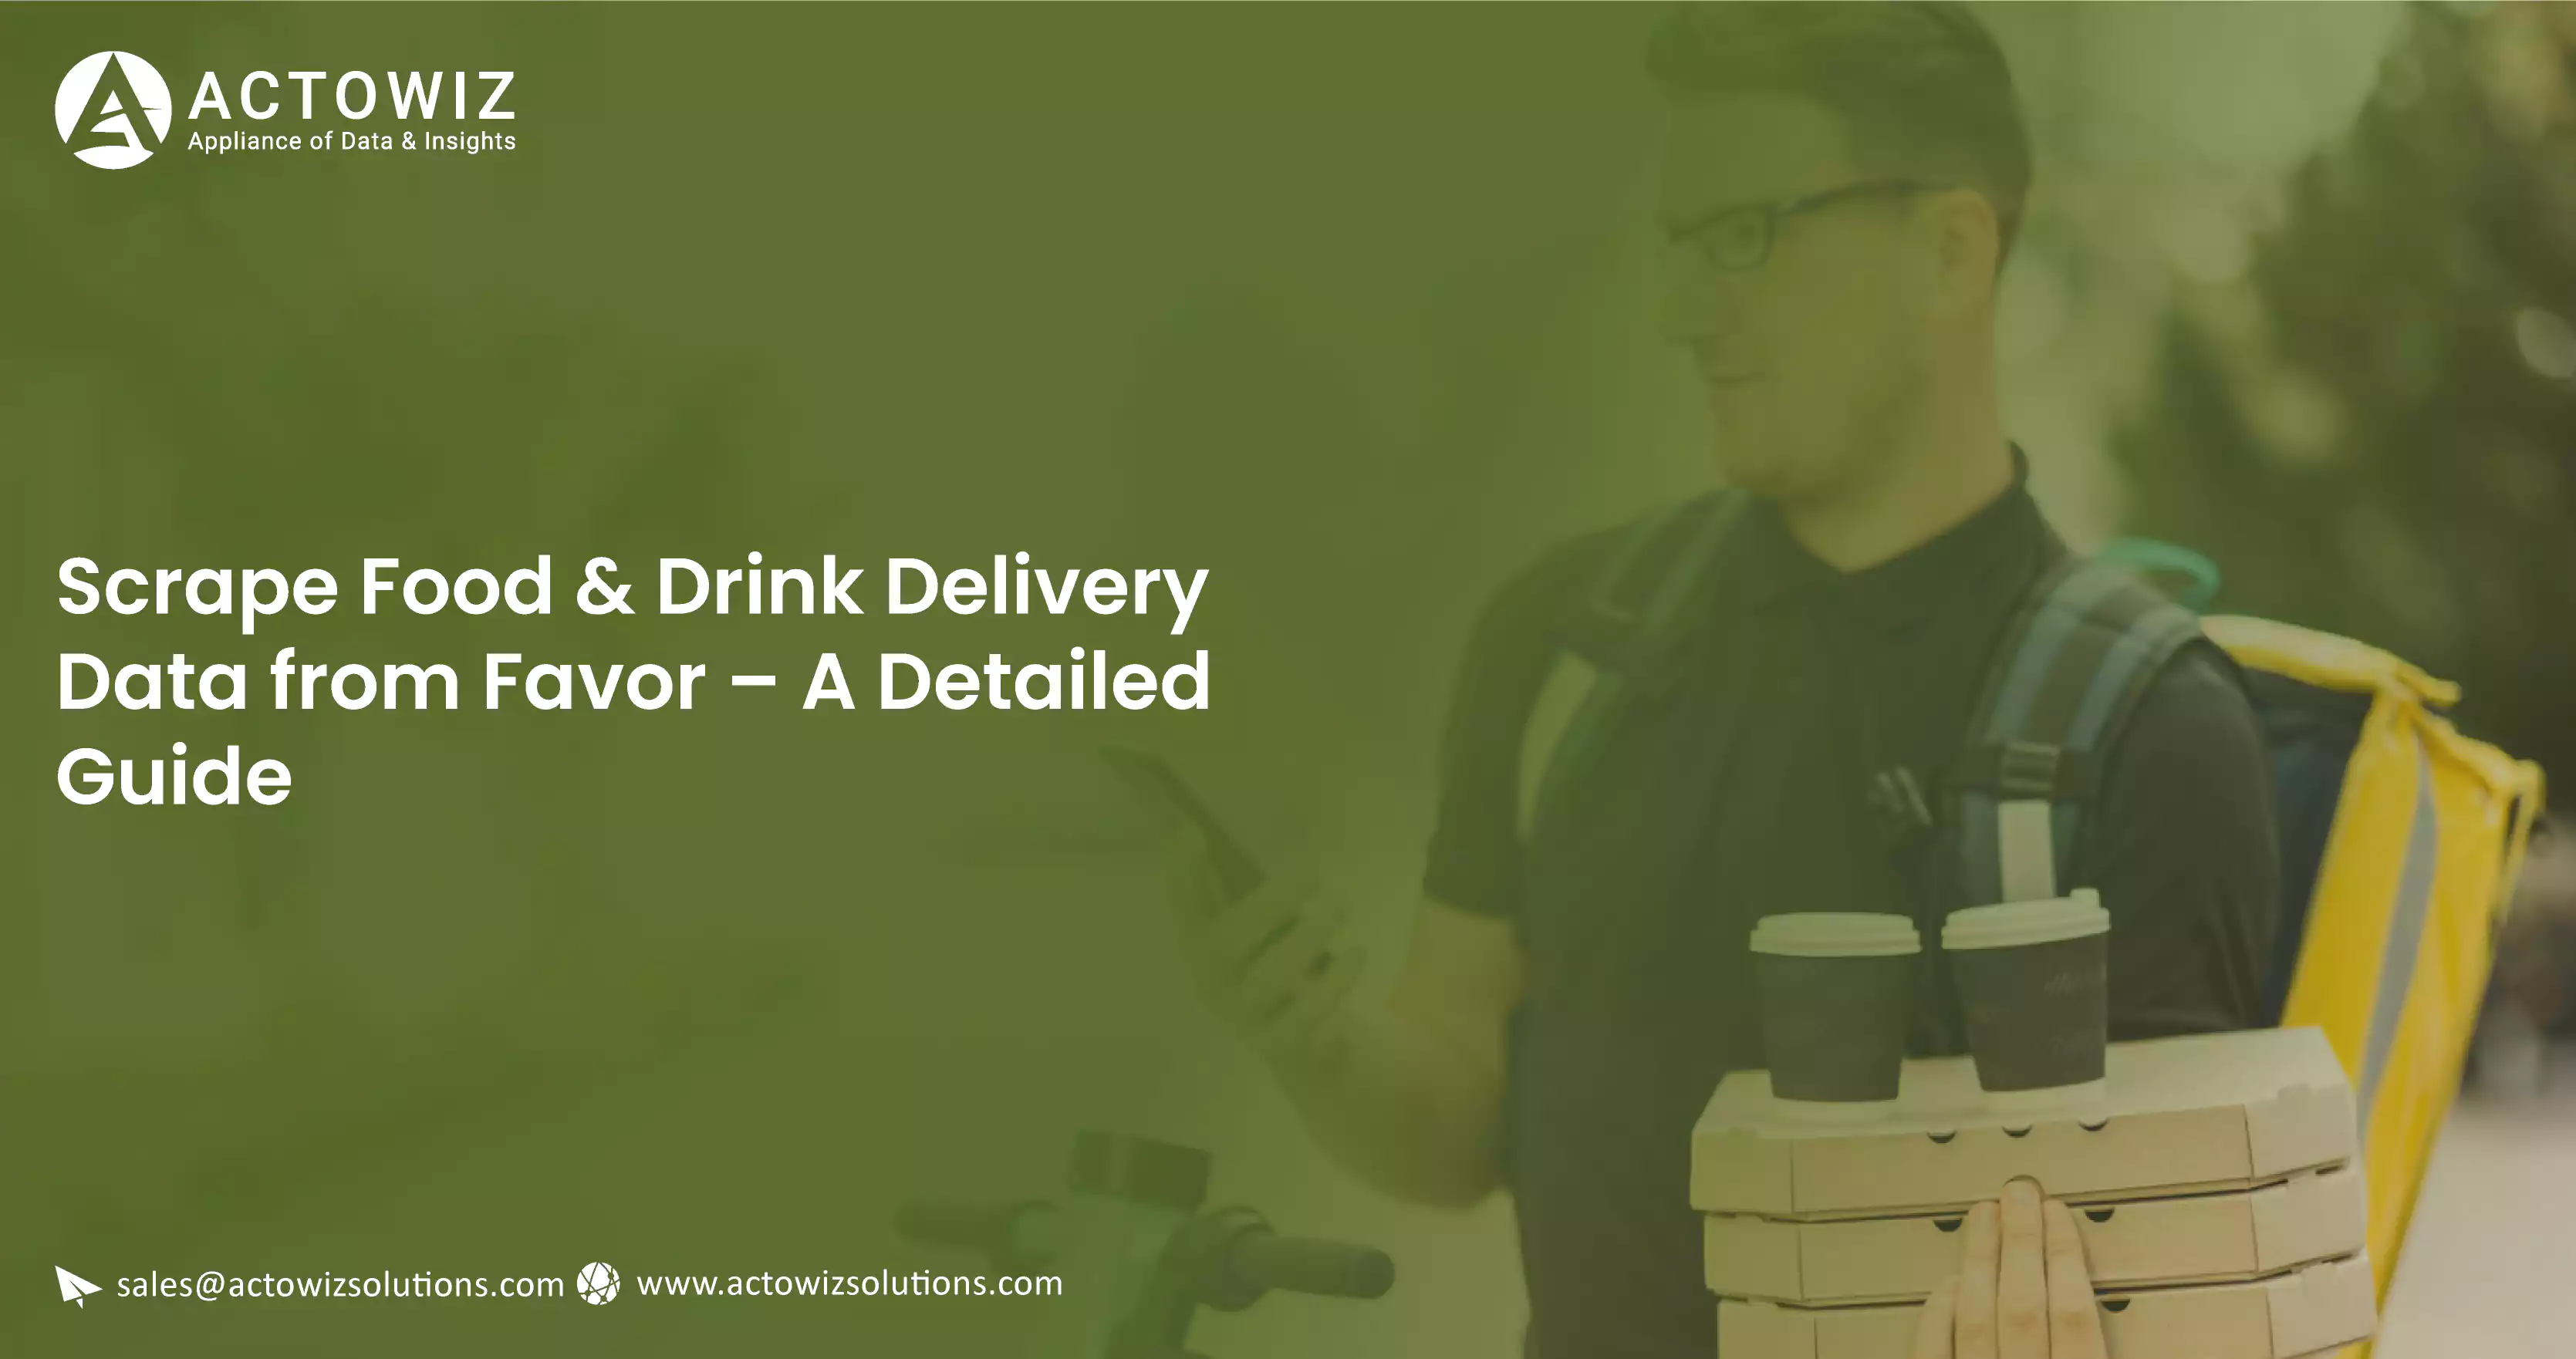 Scrape-Food-Drink-Delivery-Data-from-Favor-A-Detailed-Guide